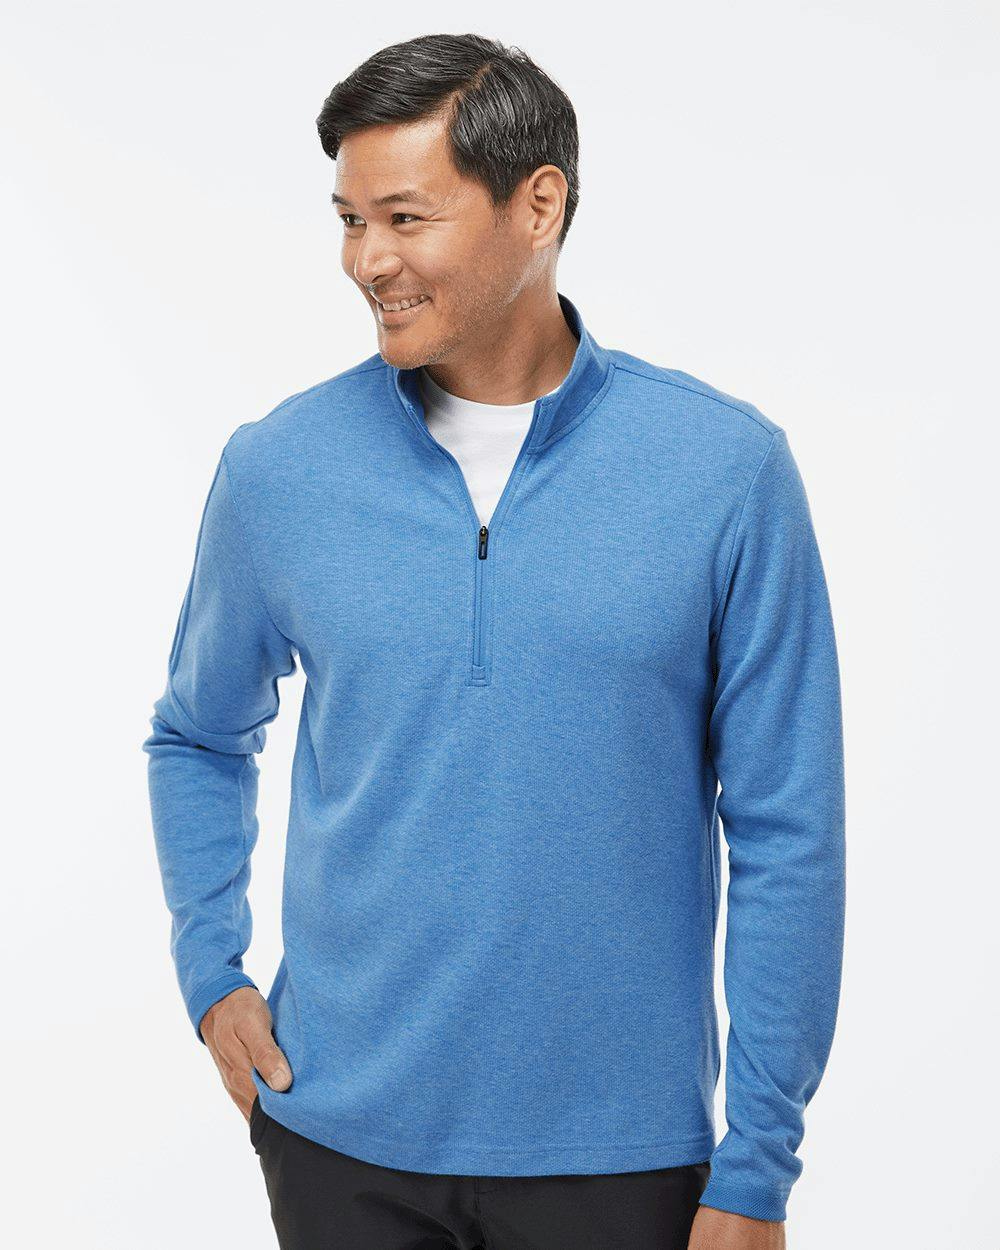 Image for 3-Stripes Quarter-Zip Sweater - A554